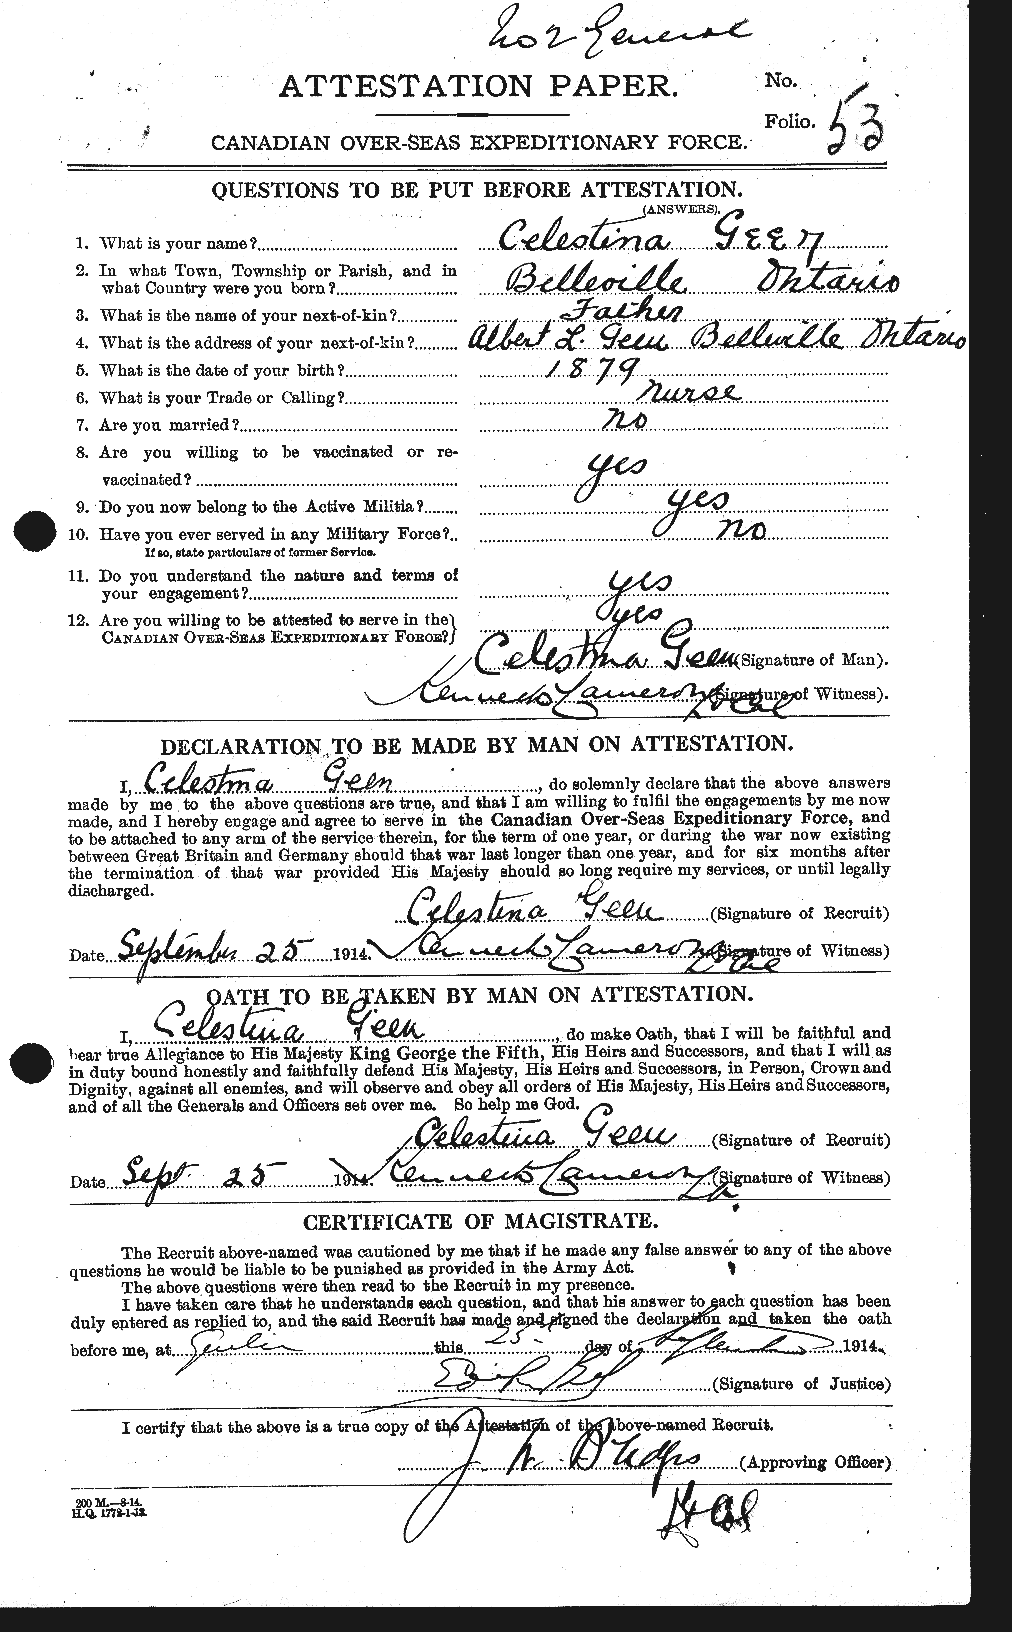 Personnel Records of the First World War - CEF 346907a